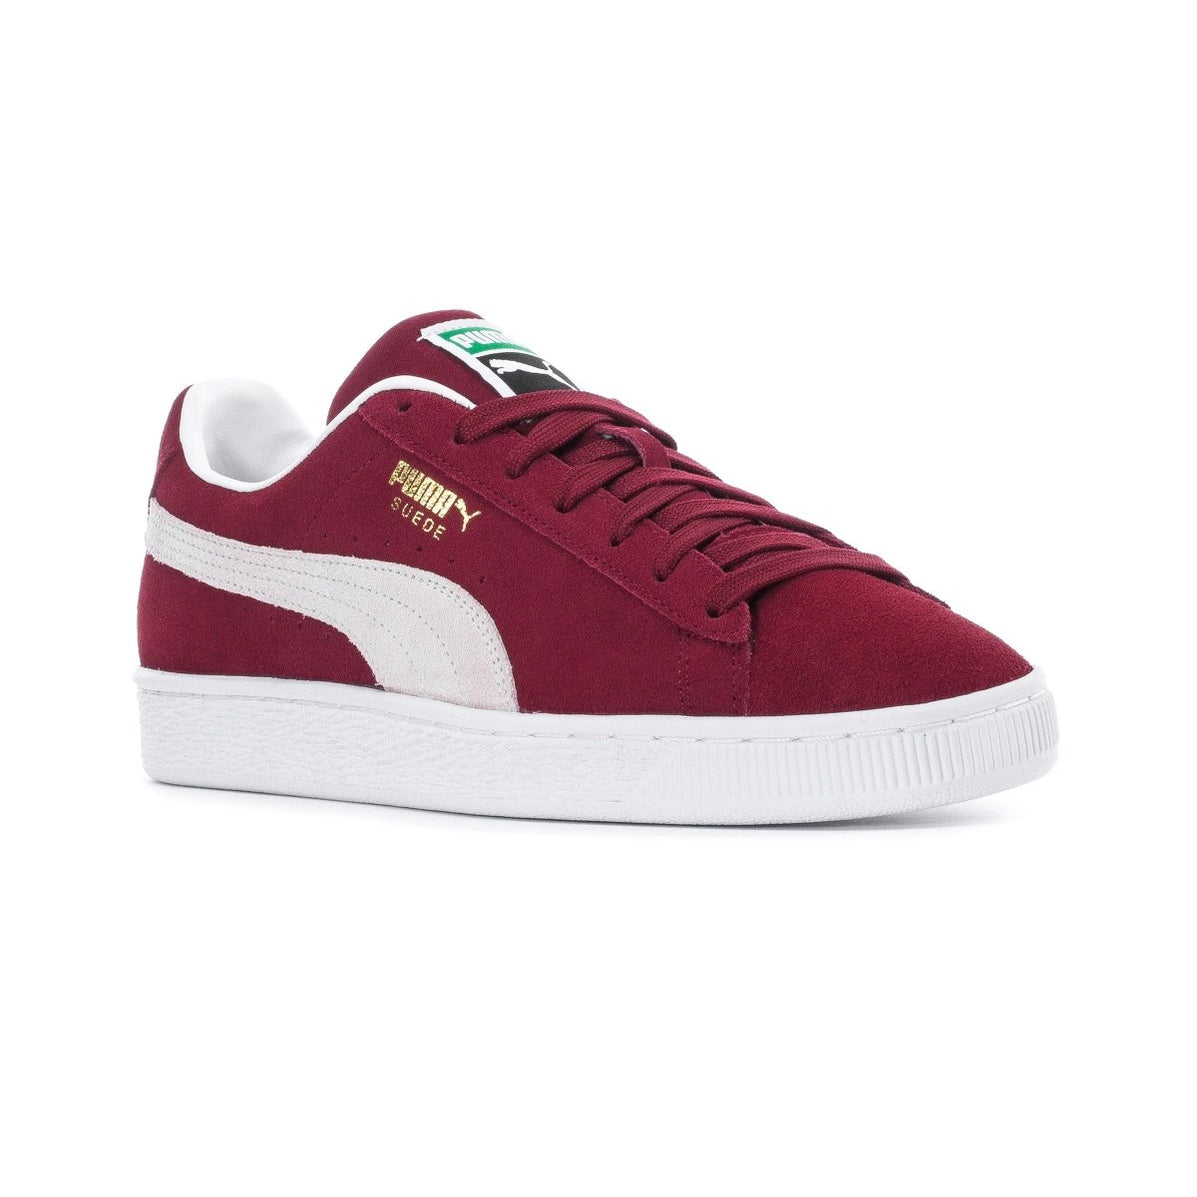 Puma Men's Suede Classic XXI Cabernet/White - Tip Top Shoes of New York